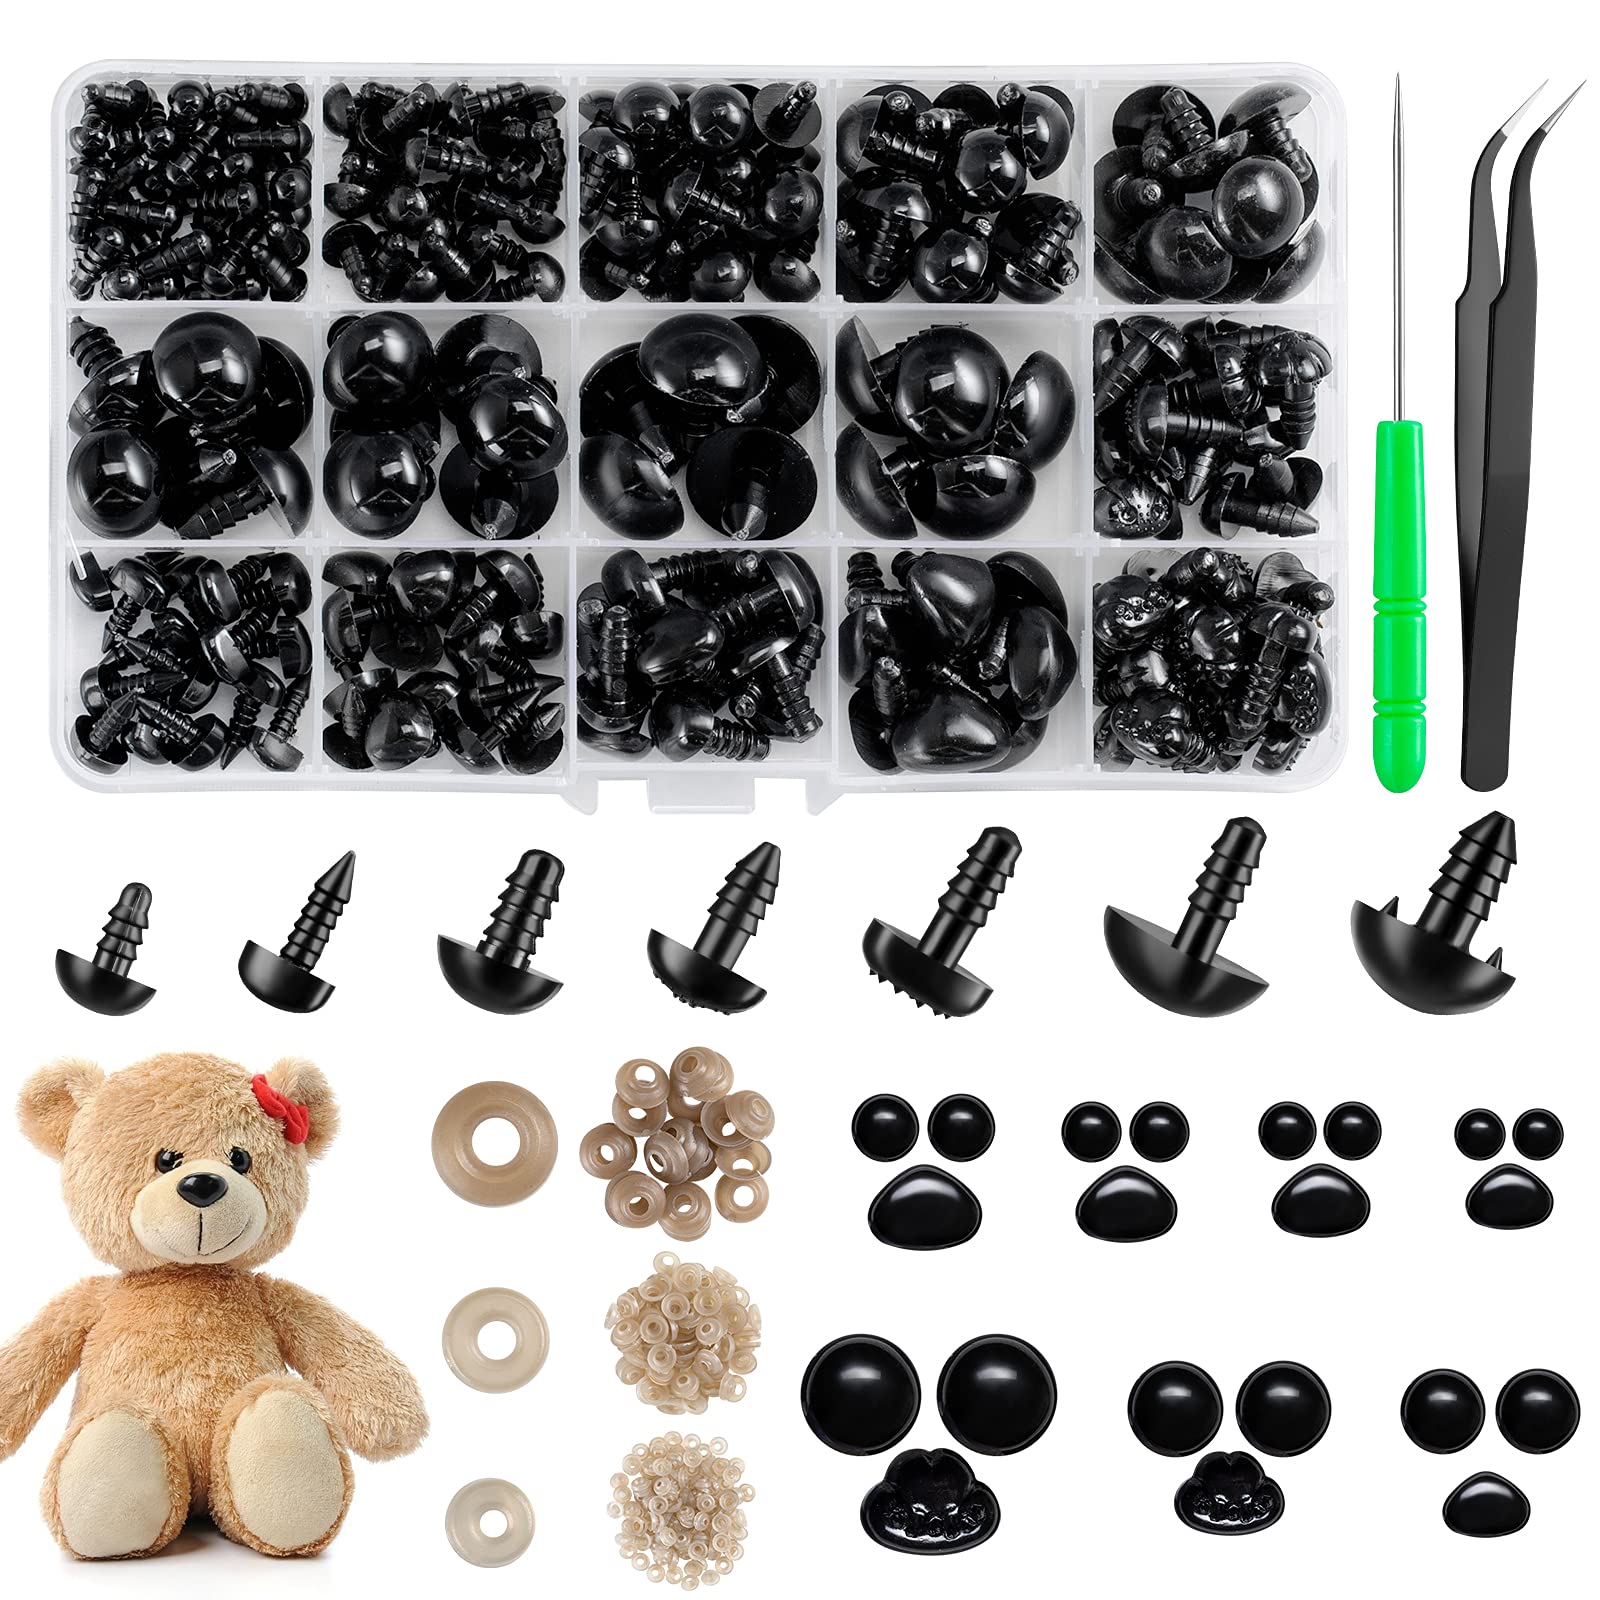 Safety Eyes and Noses Plastic Craft Eyes and Teddy Bear Nose for Amigurumi  with Washers Crochet and Tweezers for Doll Making Supplies